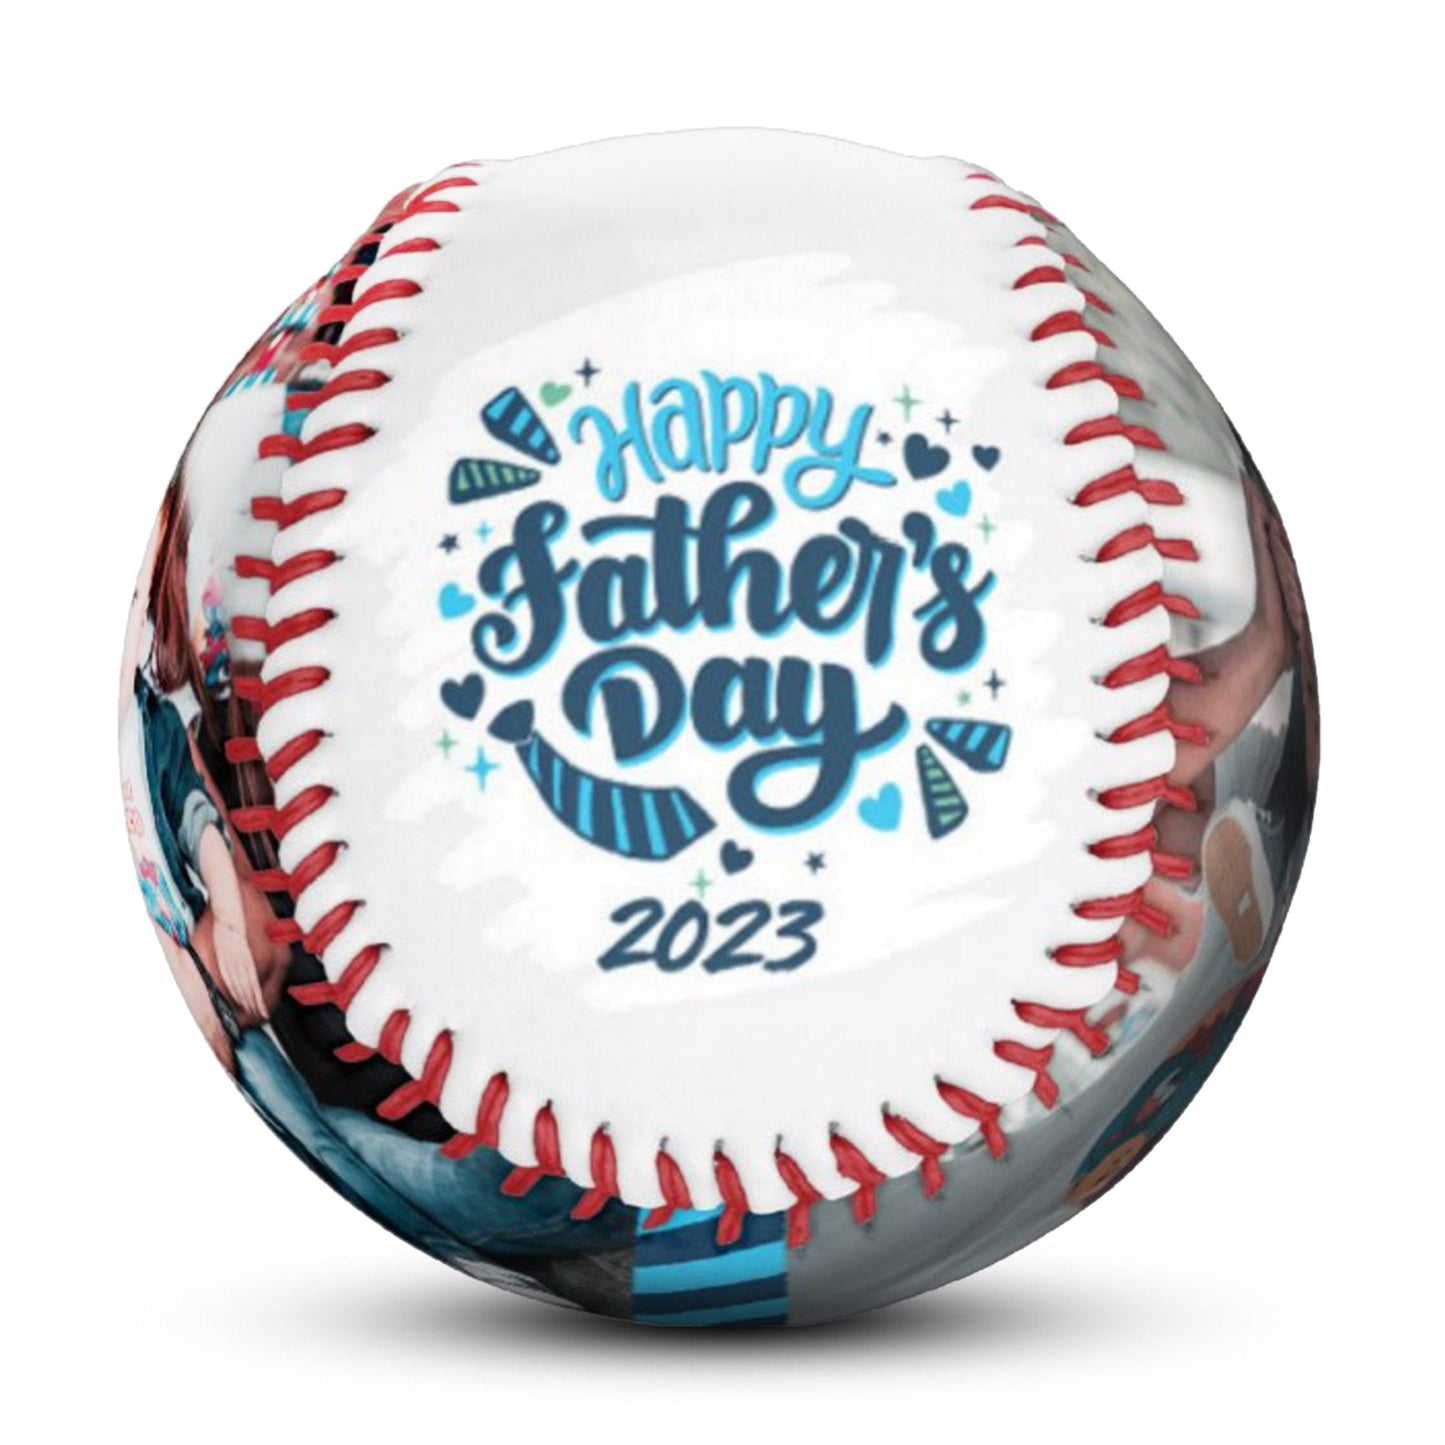 ⚾ Personalized Photo Baseball - Father's Day Baseball Gifts for Baseball Lovers